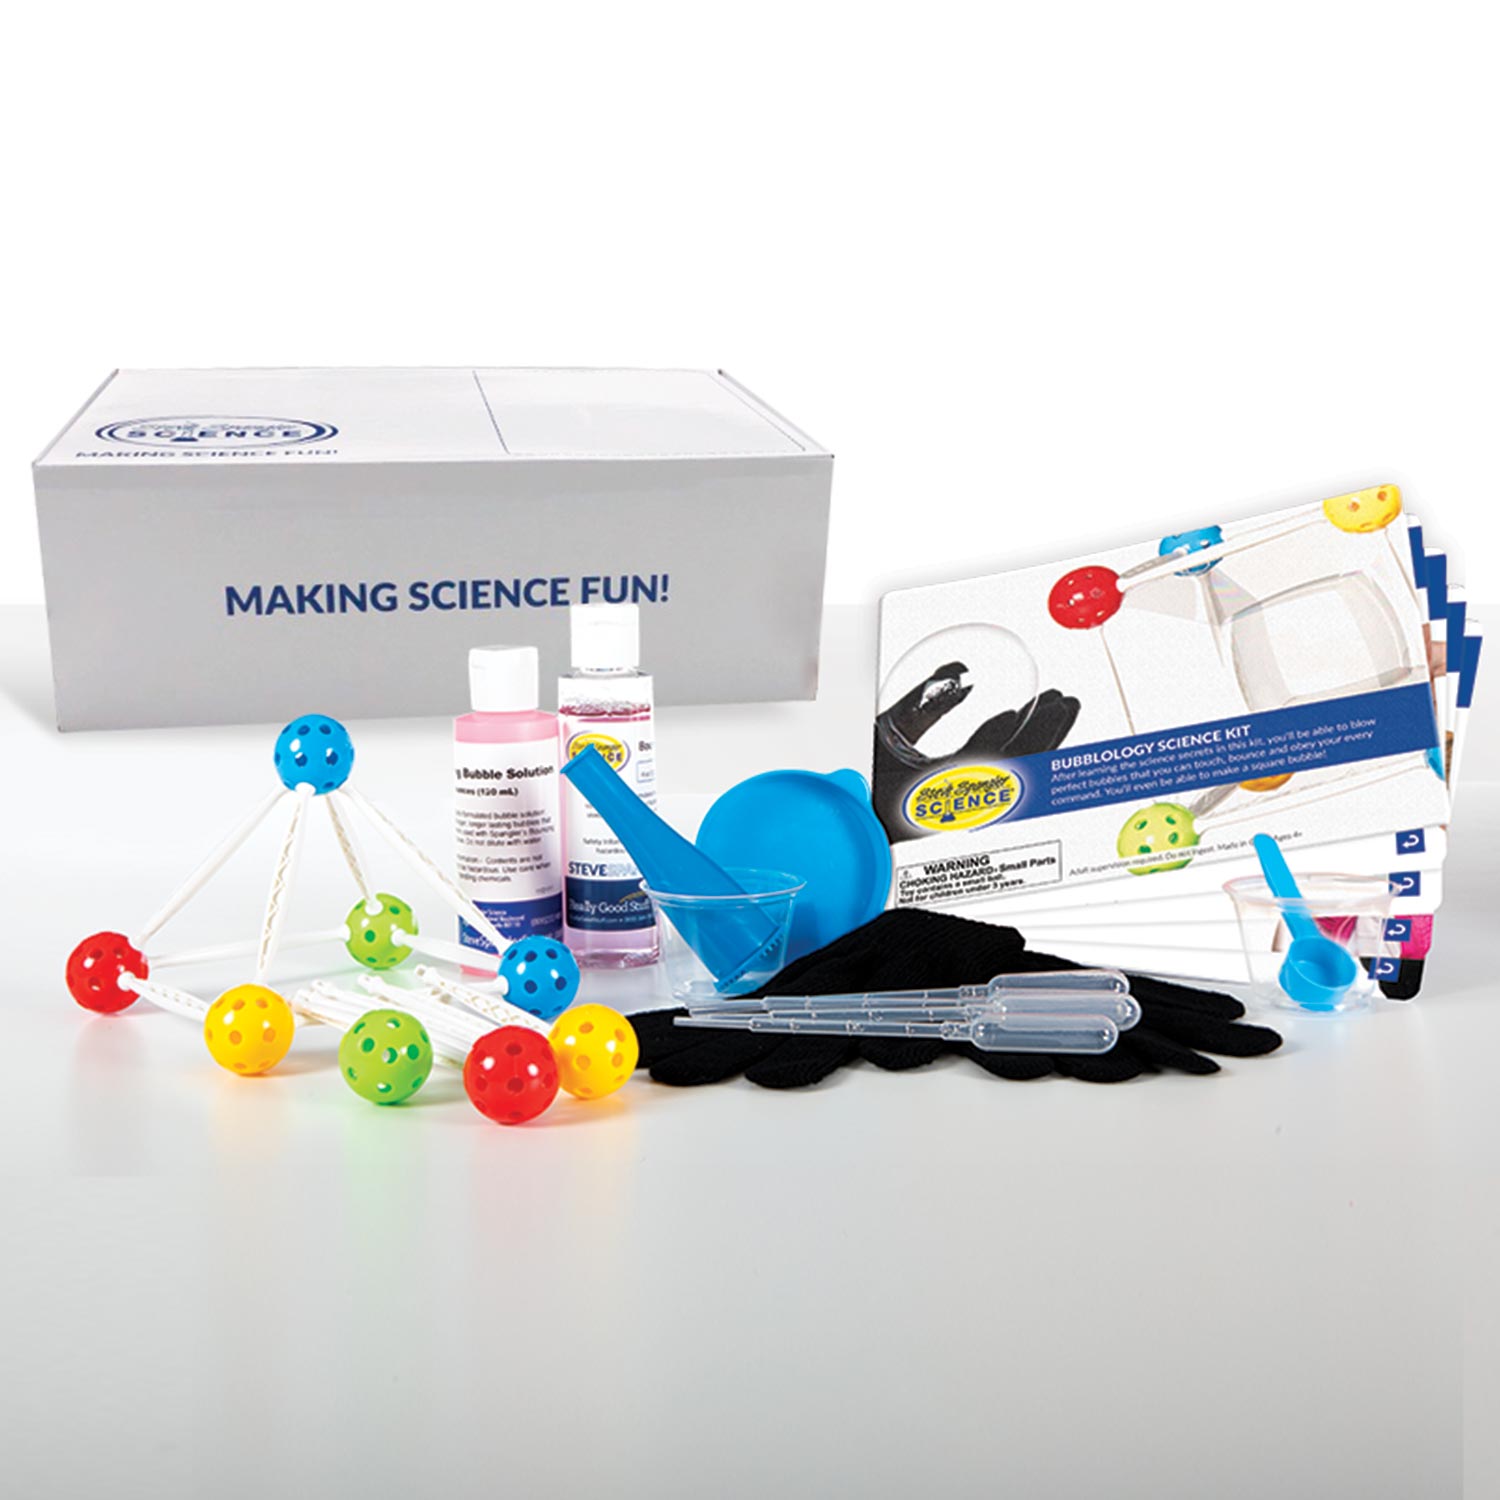 Arts, Crafts & Science Kits for 5-12 Year Olds